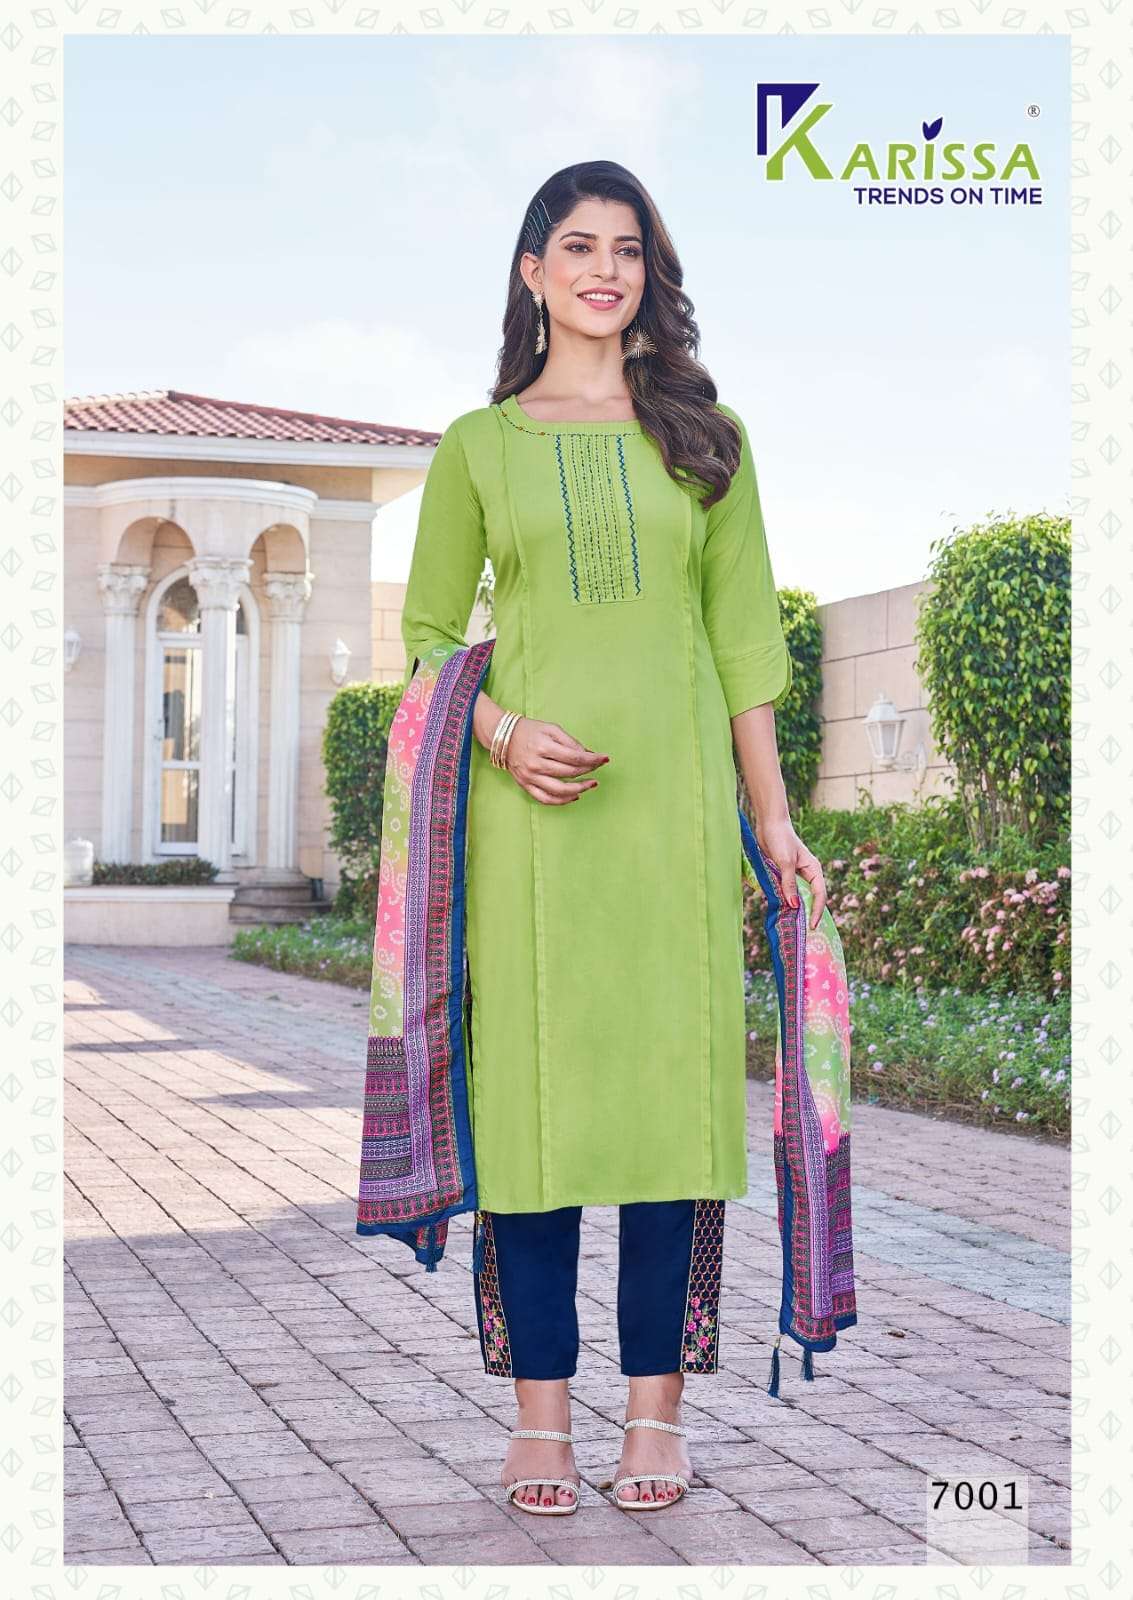 Ethnic Suits for Women | Suit Sets for Women - Westside – Page 2